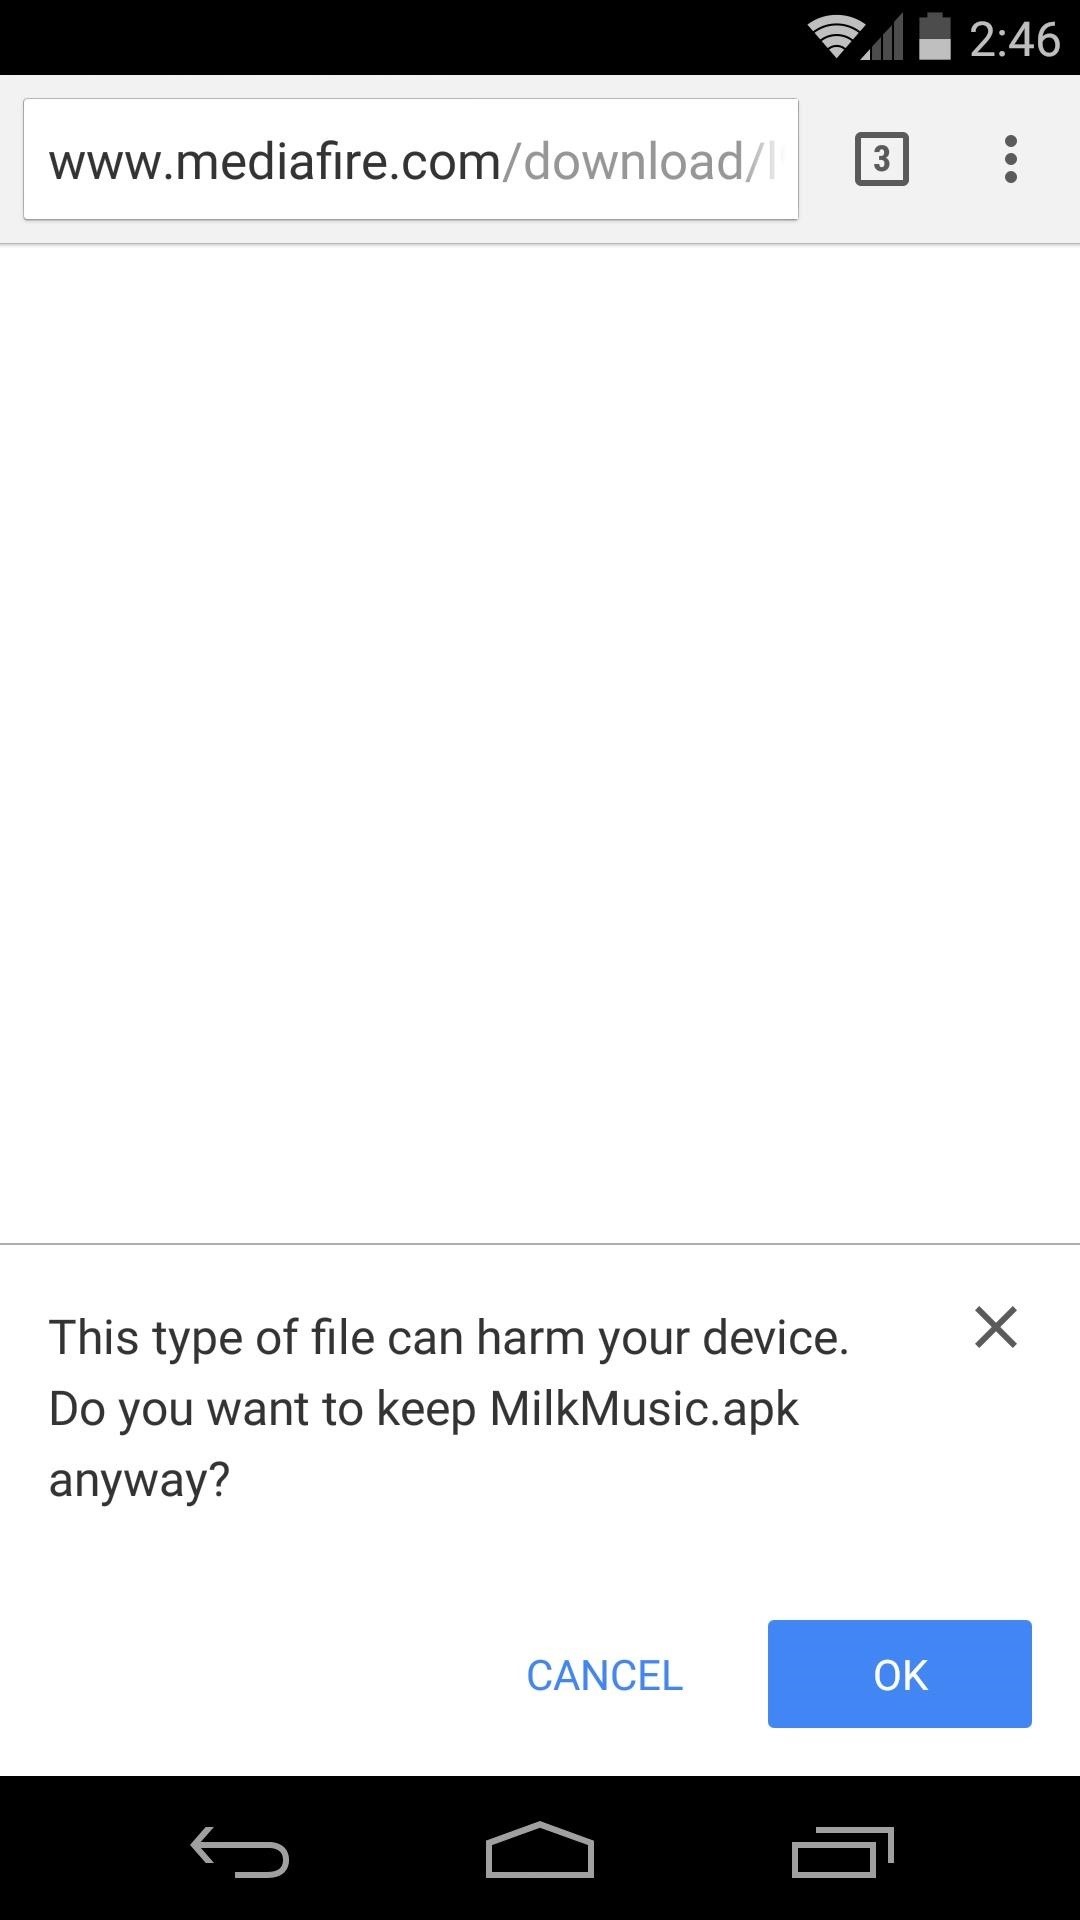 Install Samsung's Exclusive Milk Music App on Any Android (No Root Needed)